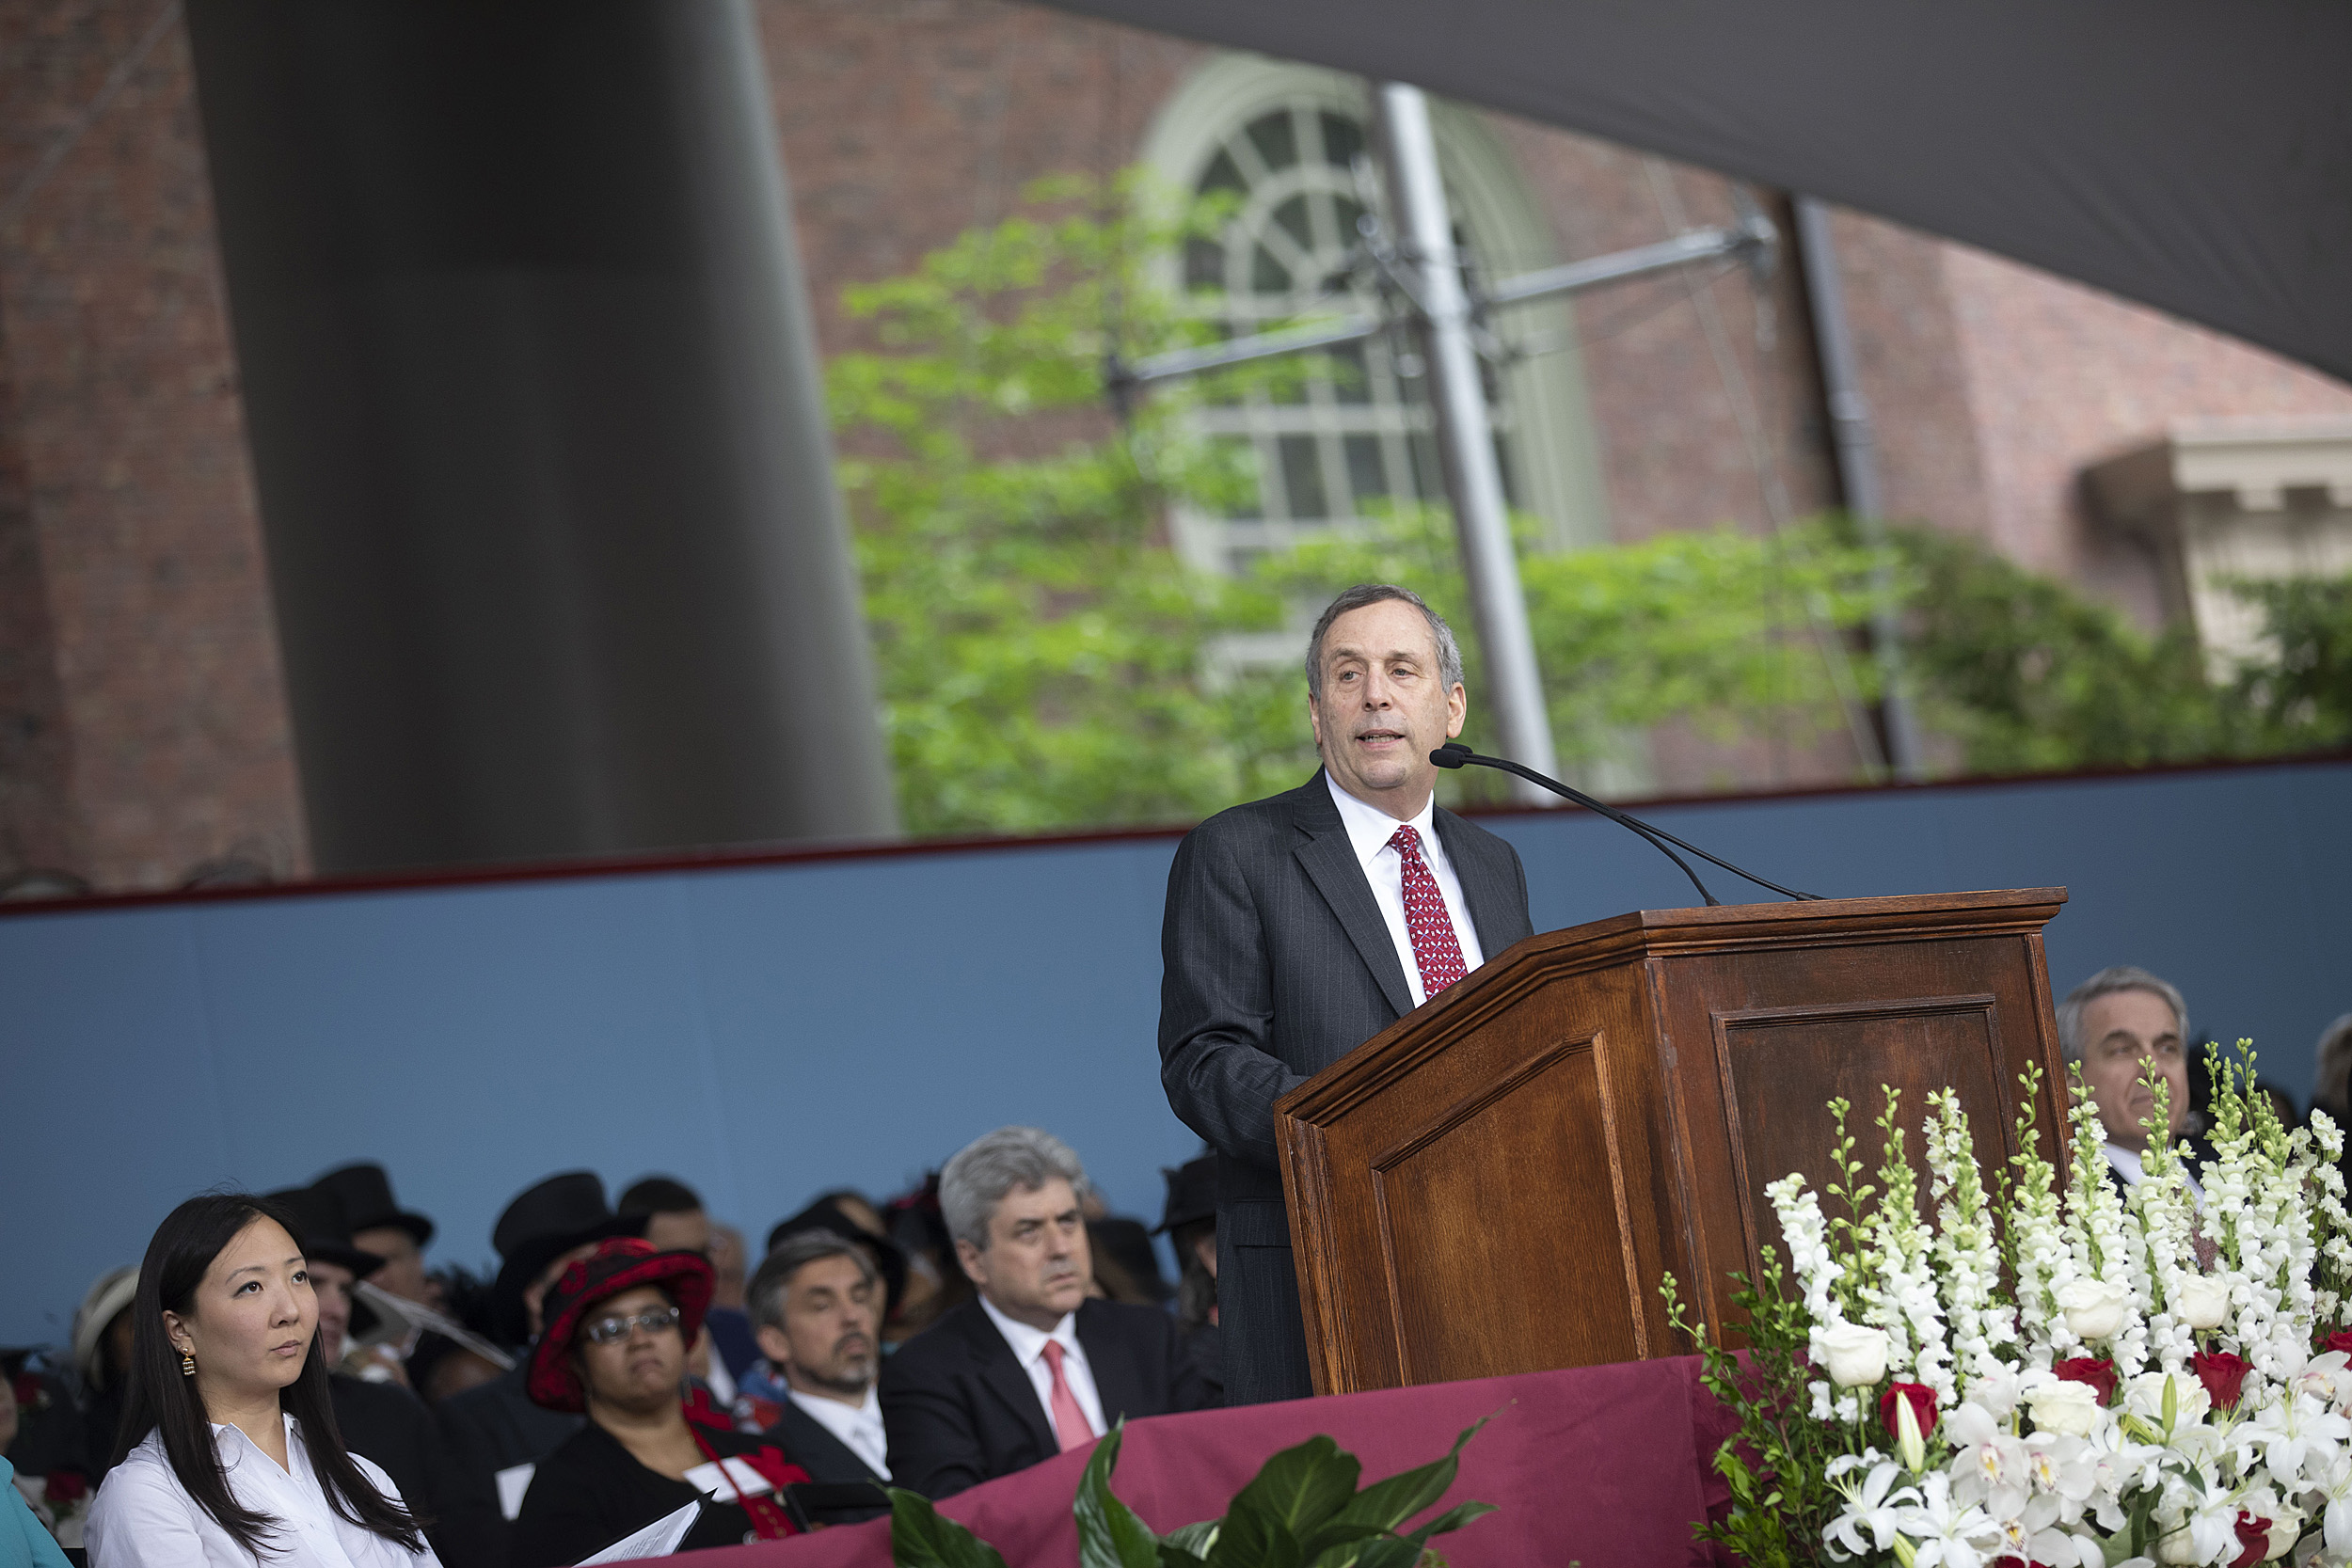 President Larry Bacow speaks at the Afternoon Program.